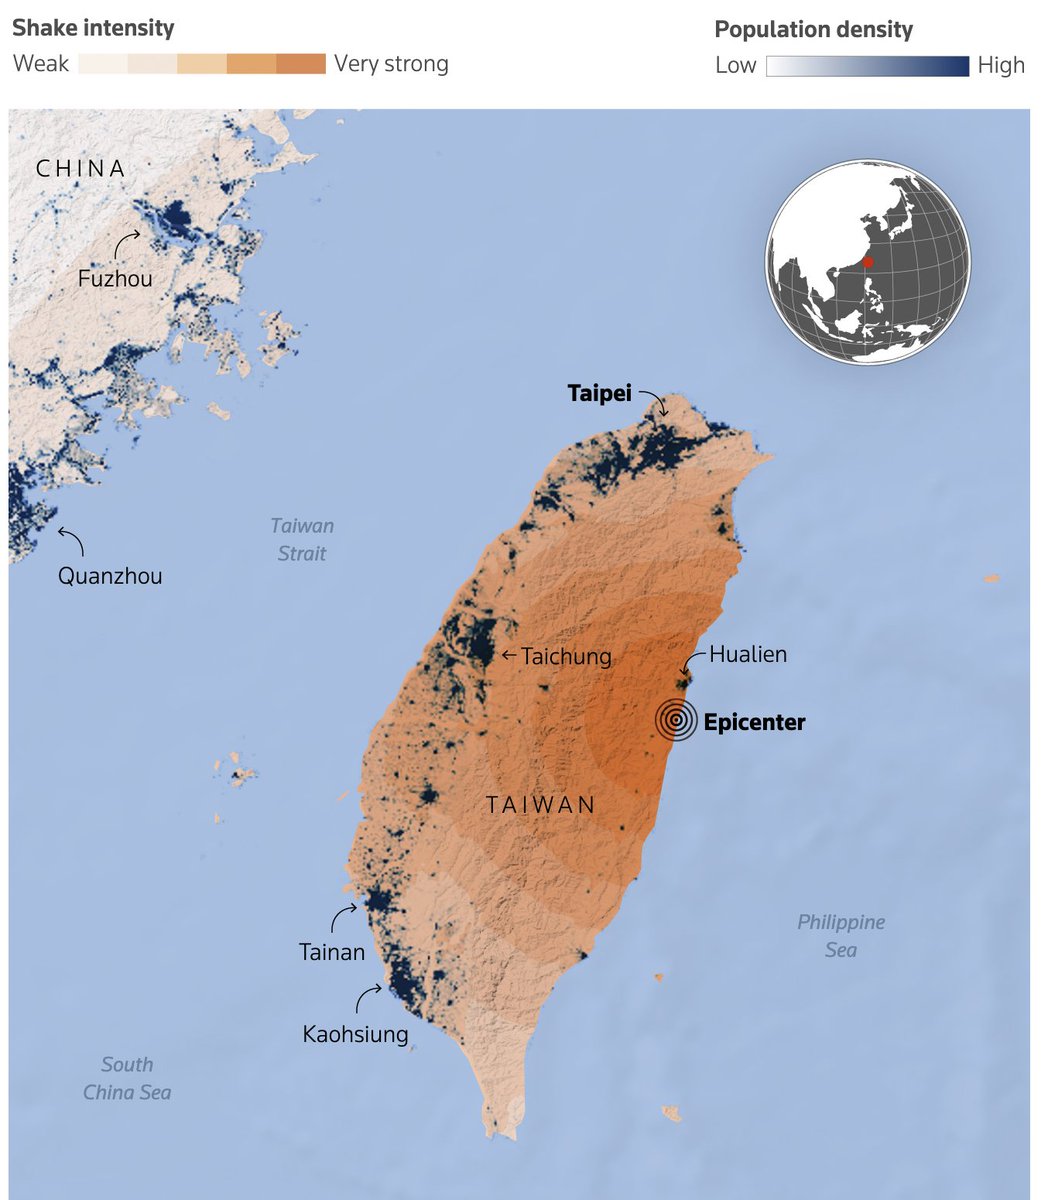 Strong earthquake hits Taiwan, the strongest to hit the island in about 25 years. reuters.com/world/asia-pac… Good graphics by @vijdankawoosa @ReutersGraphics